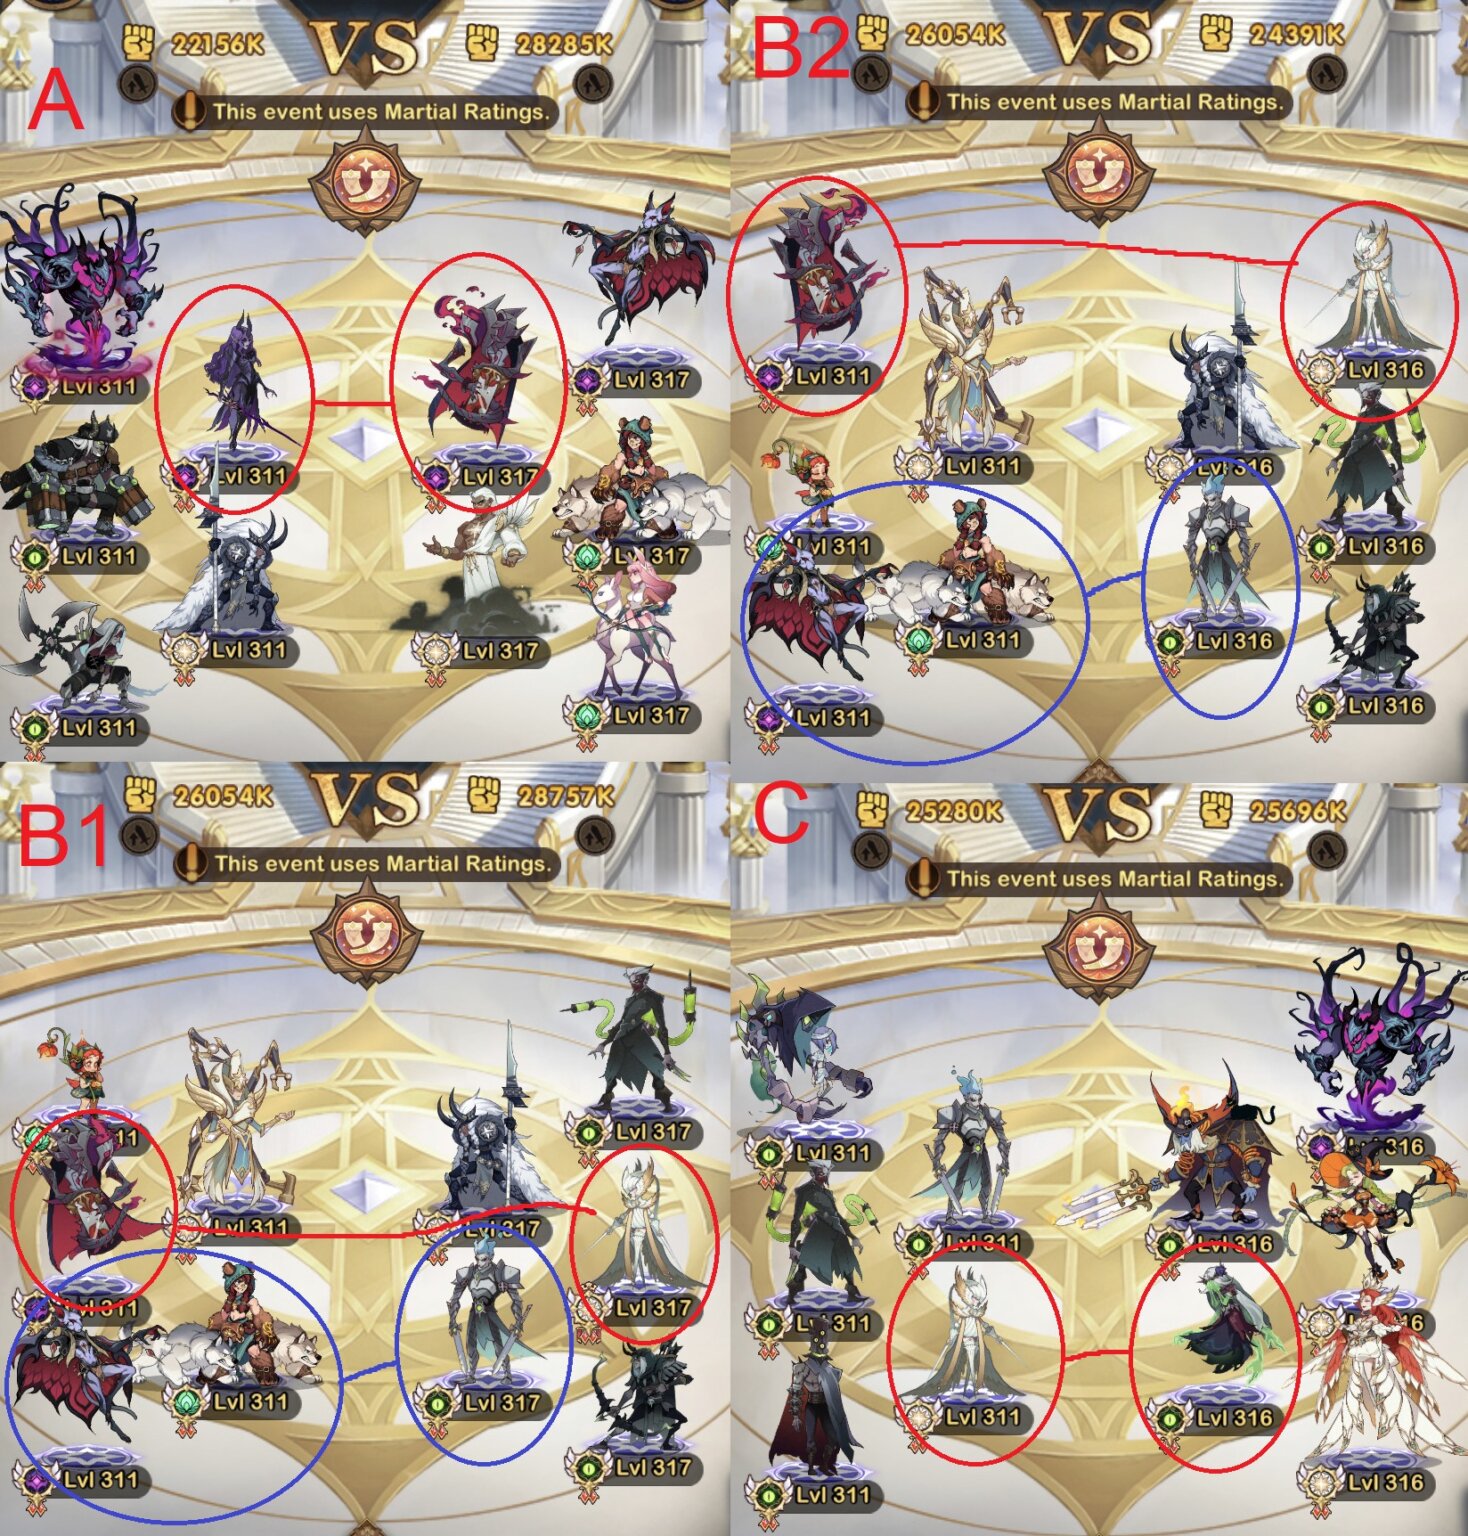 Heroes of Esperia Guide & Teams To Get to Master AFK Arena Guide